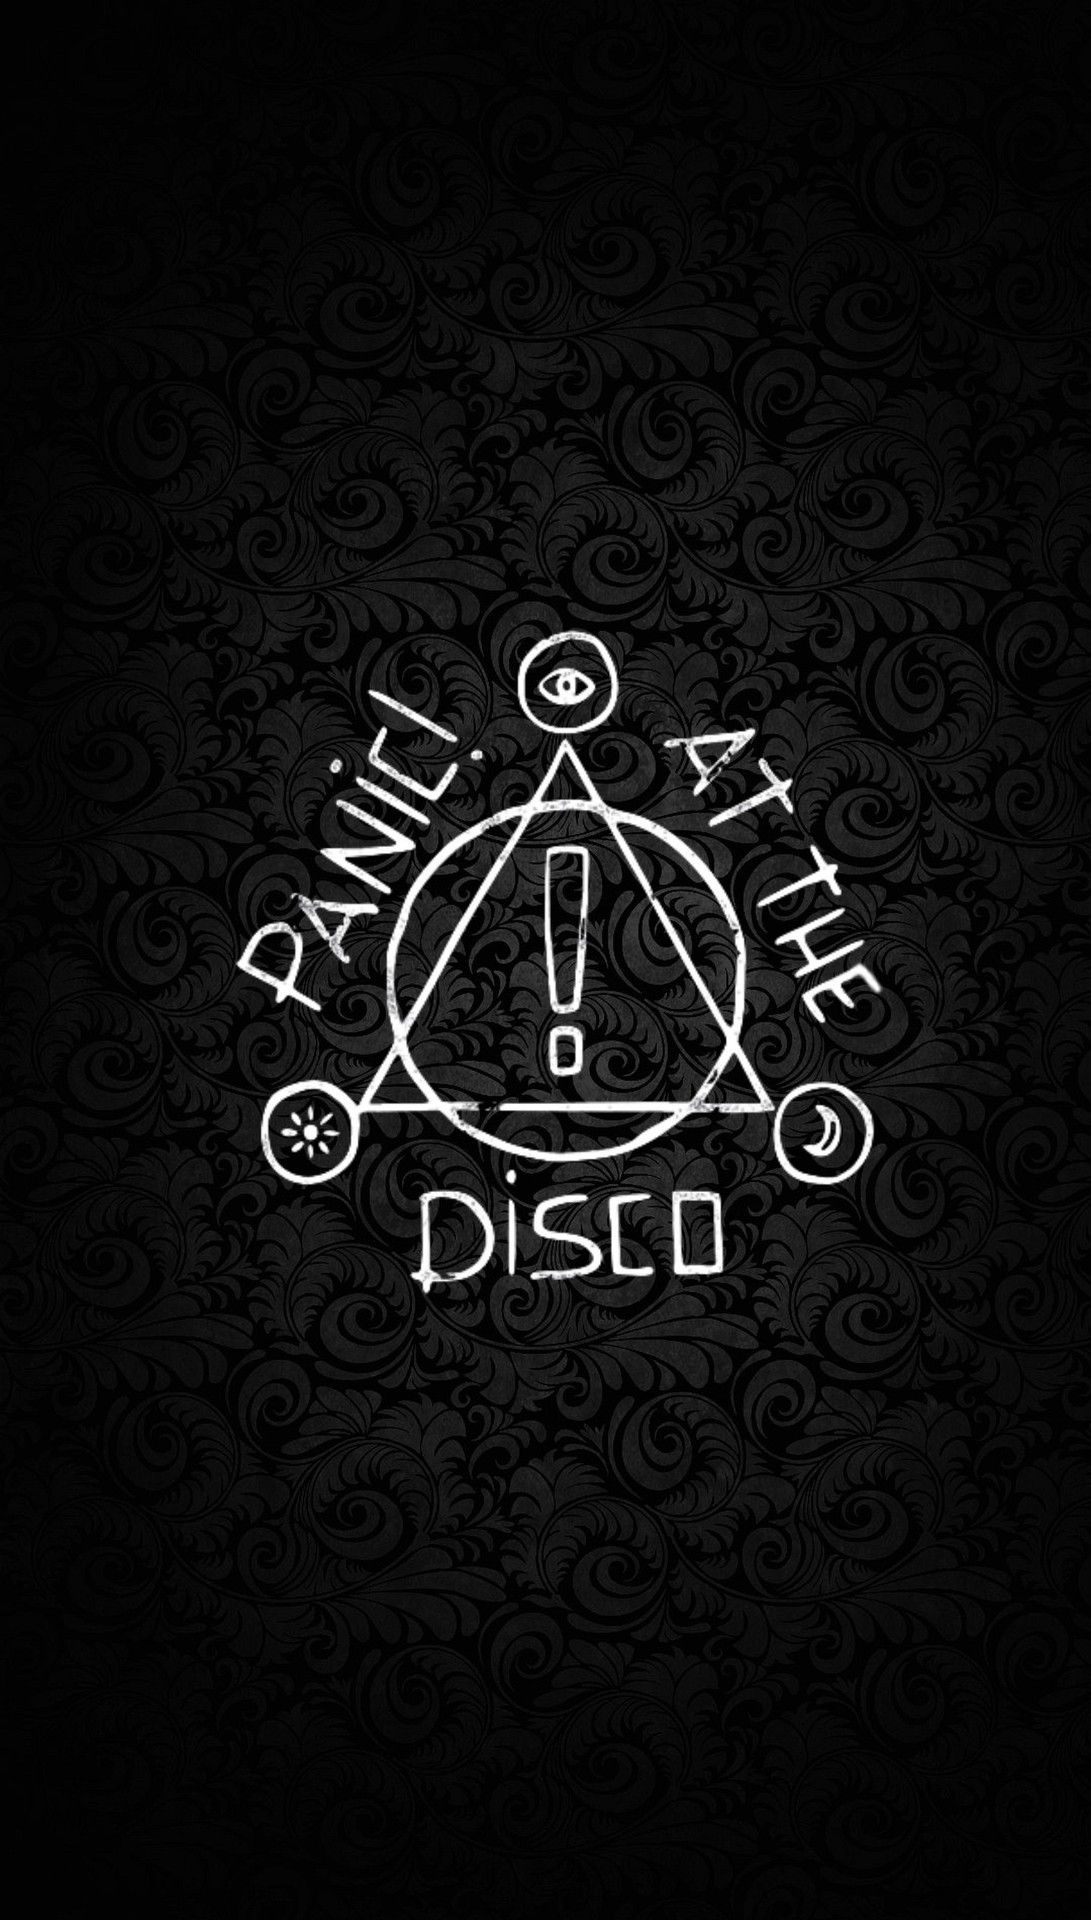 Panic! At The Disco Wallpapers